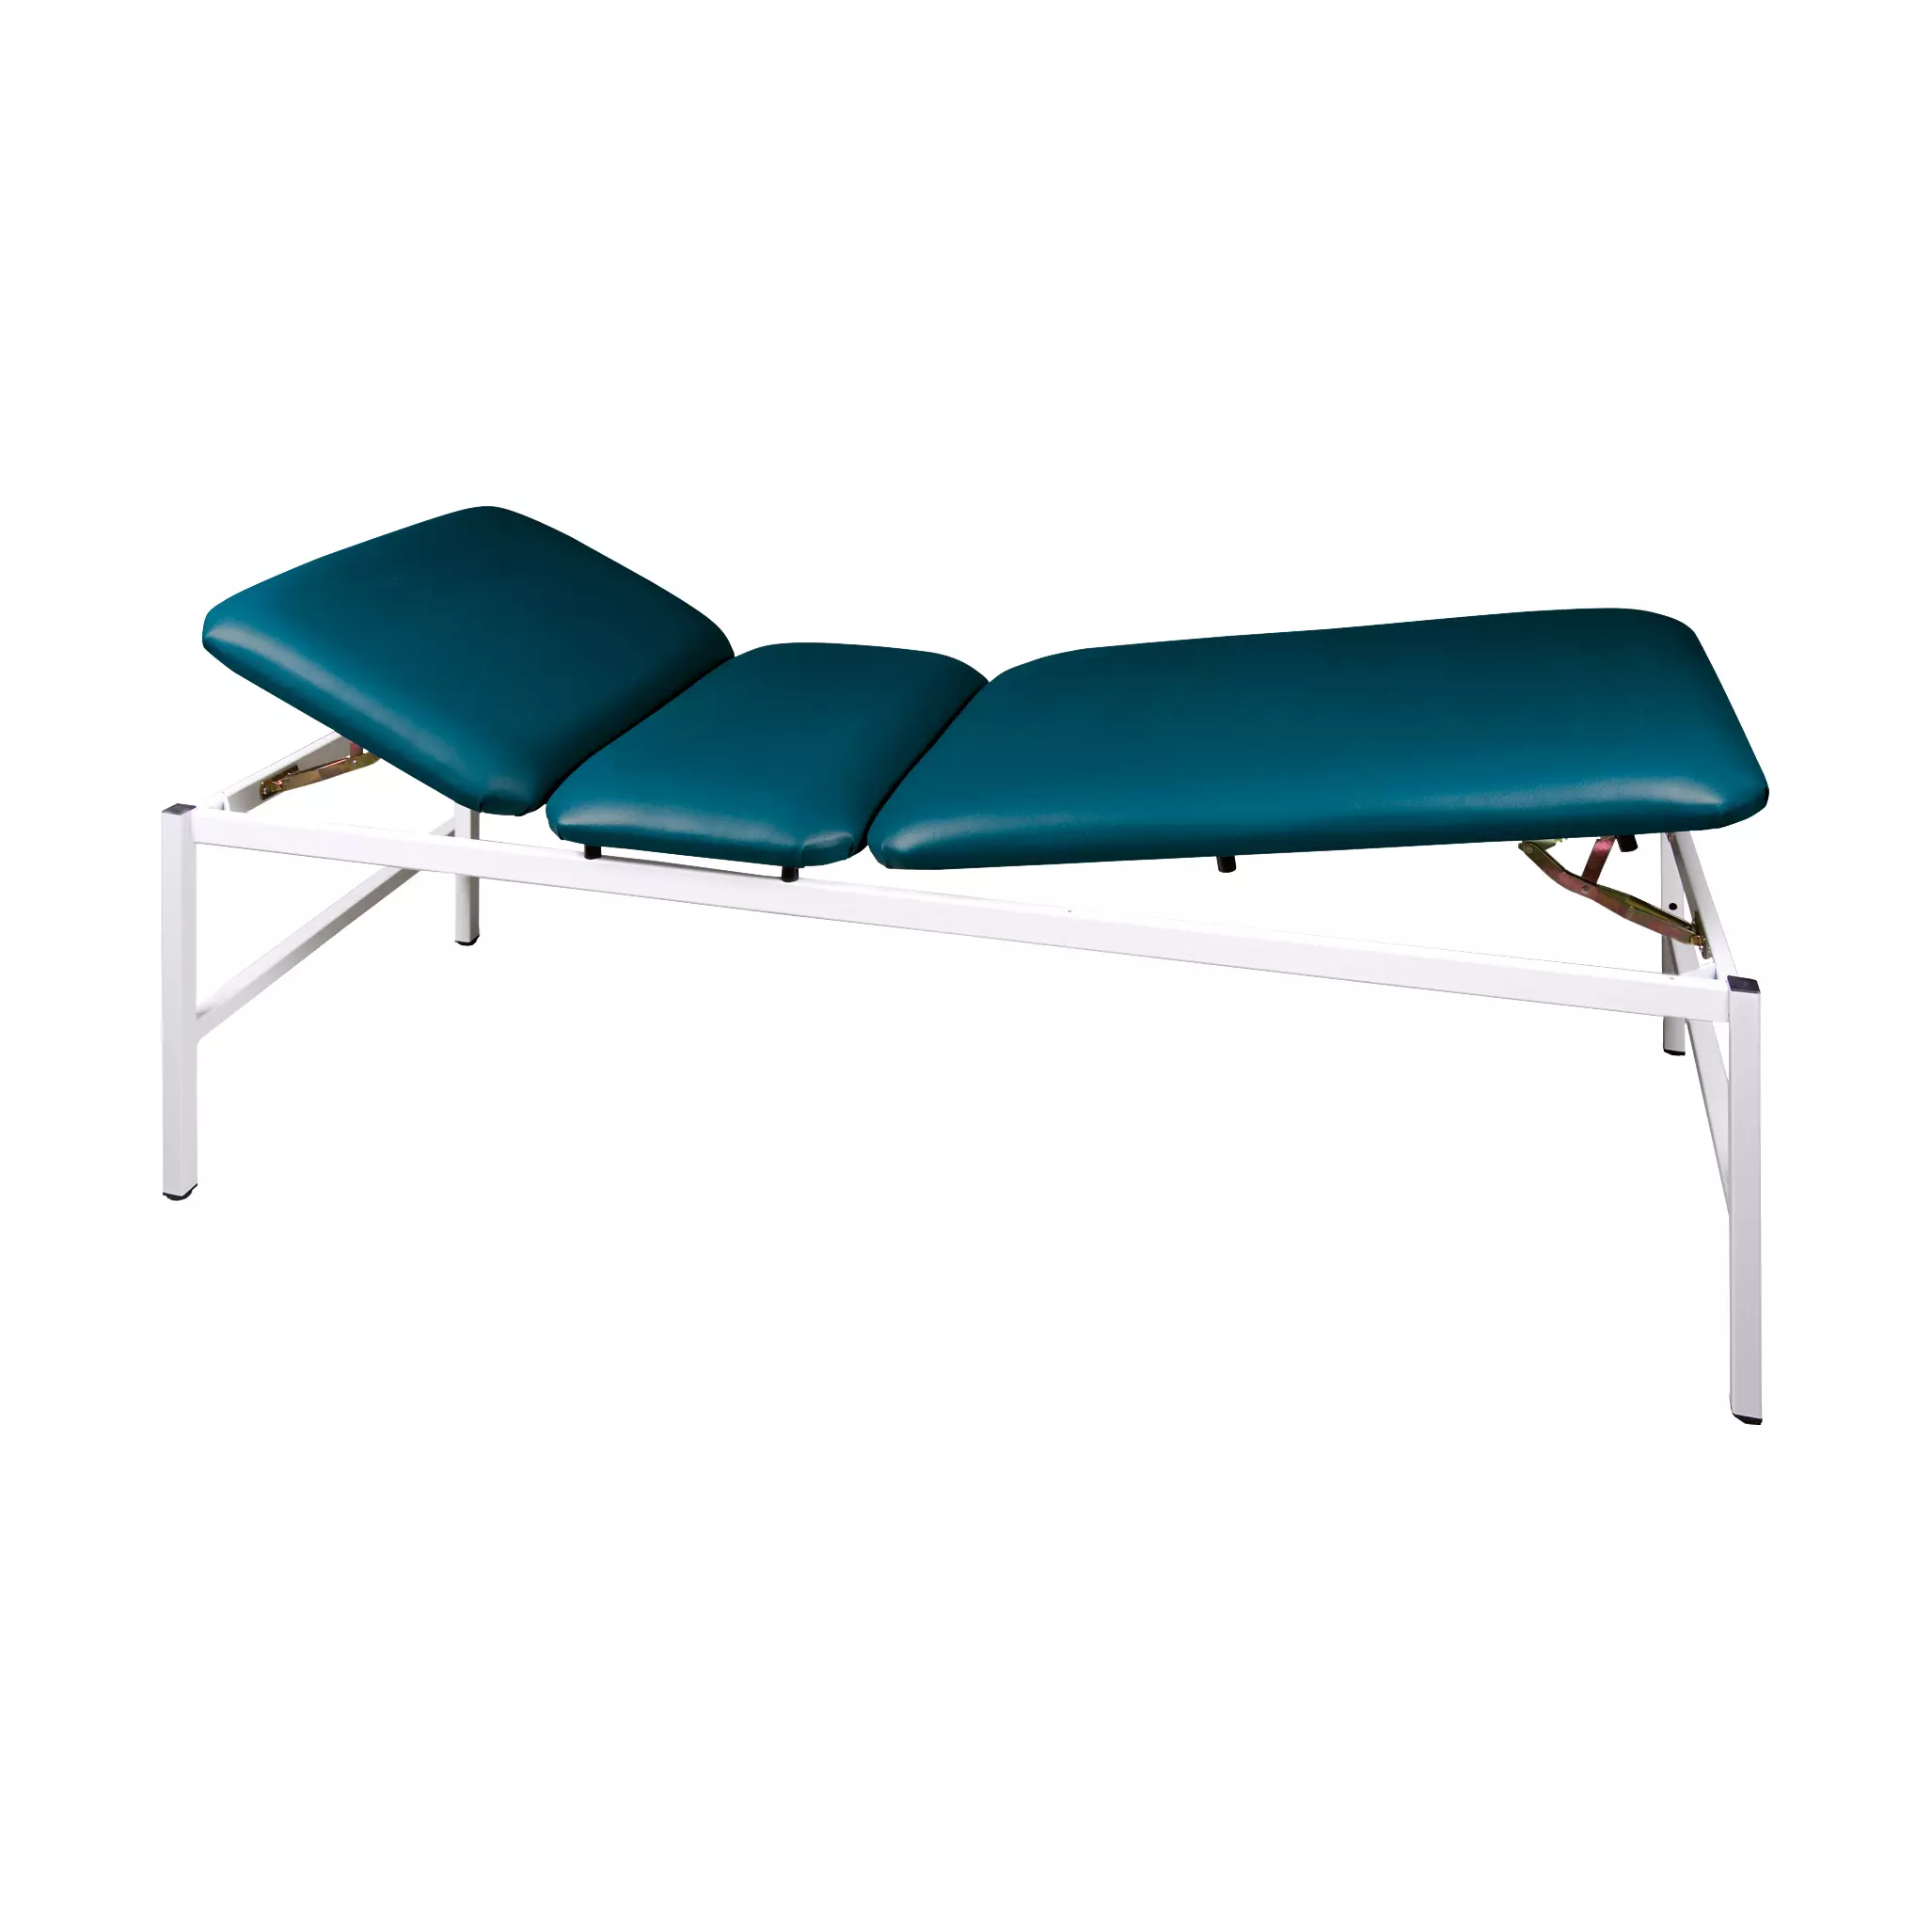 Lounger model 370, reclining surface 3-section - turquoise